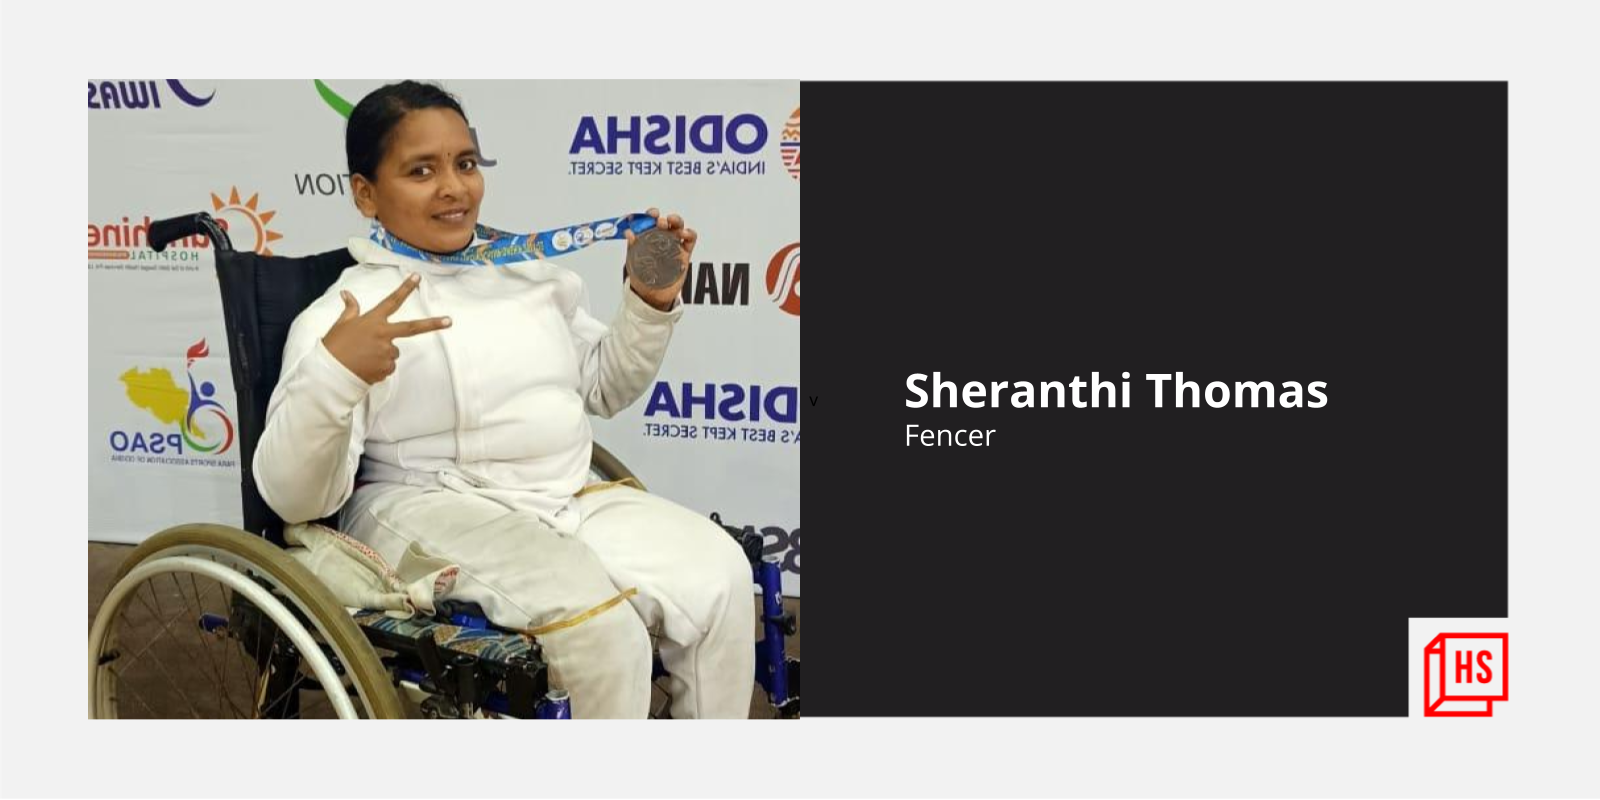 Meet the wheelchair bound fencer from Chennai who’s looking to compete in the international arena